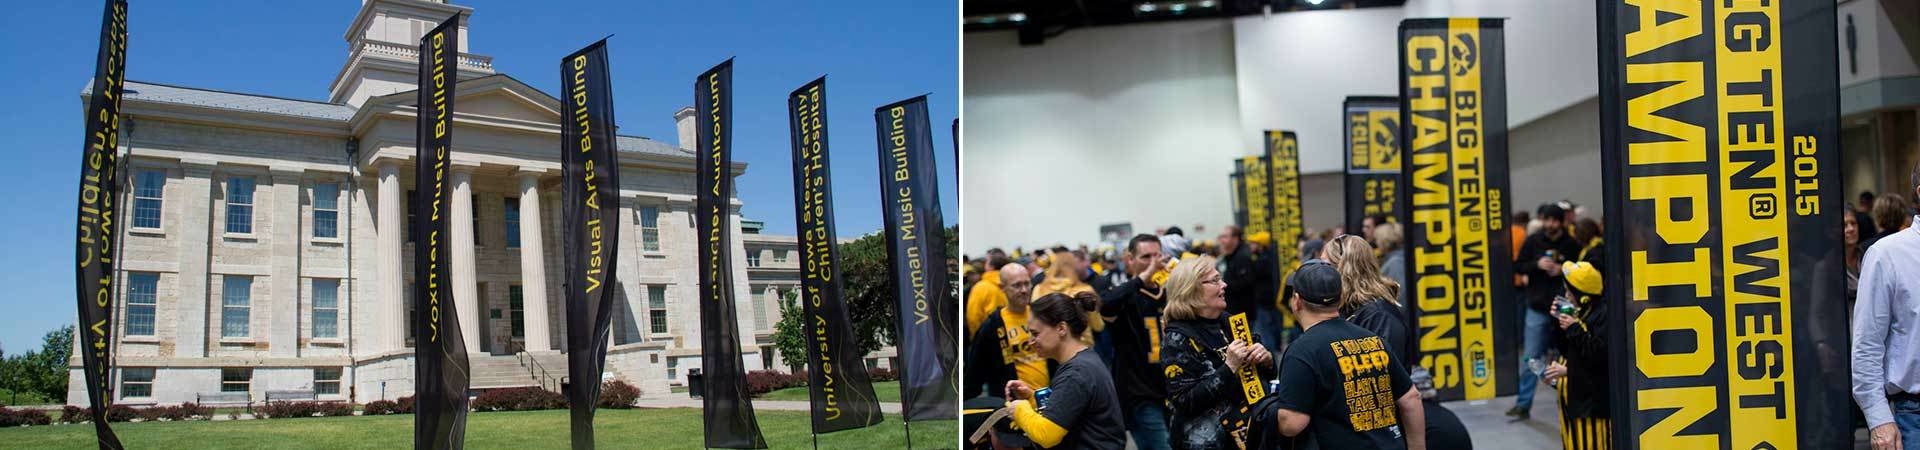 Custom printed feather flags for an indoor and outdoor university event.